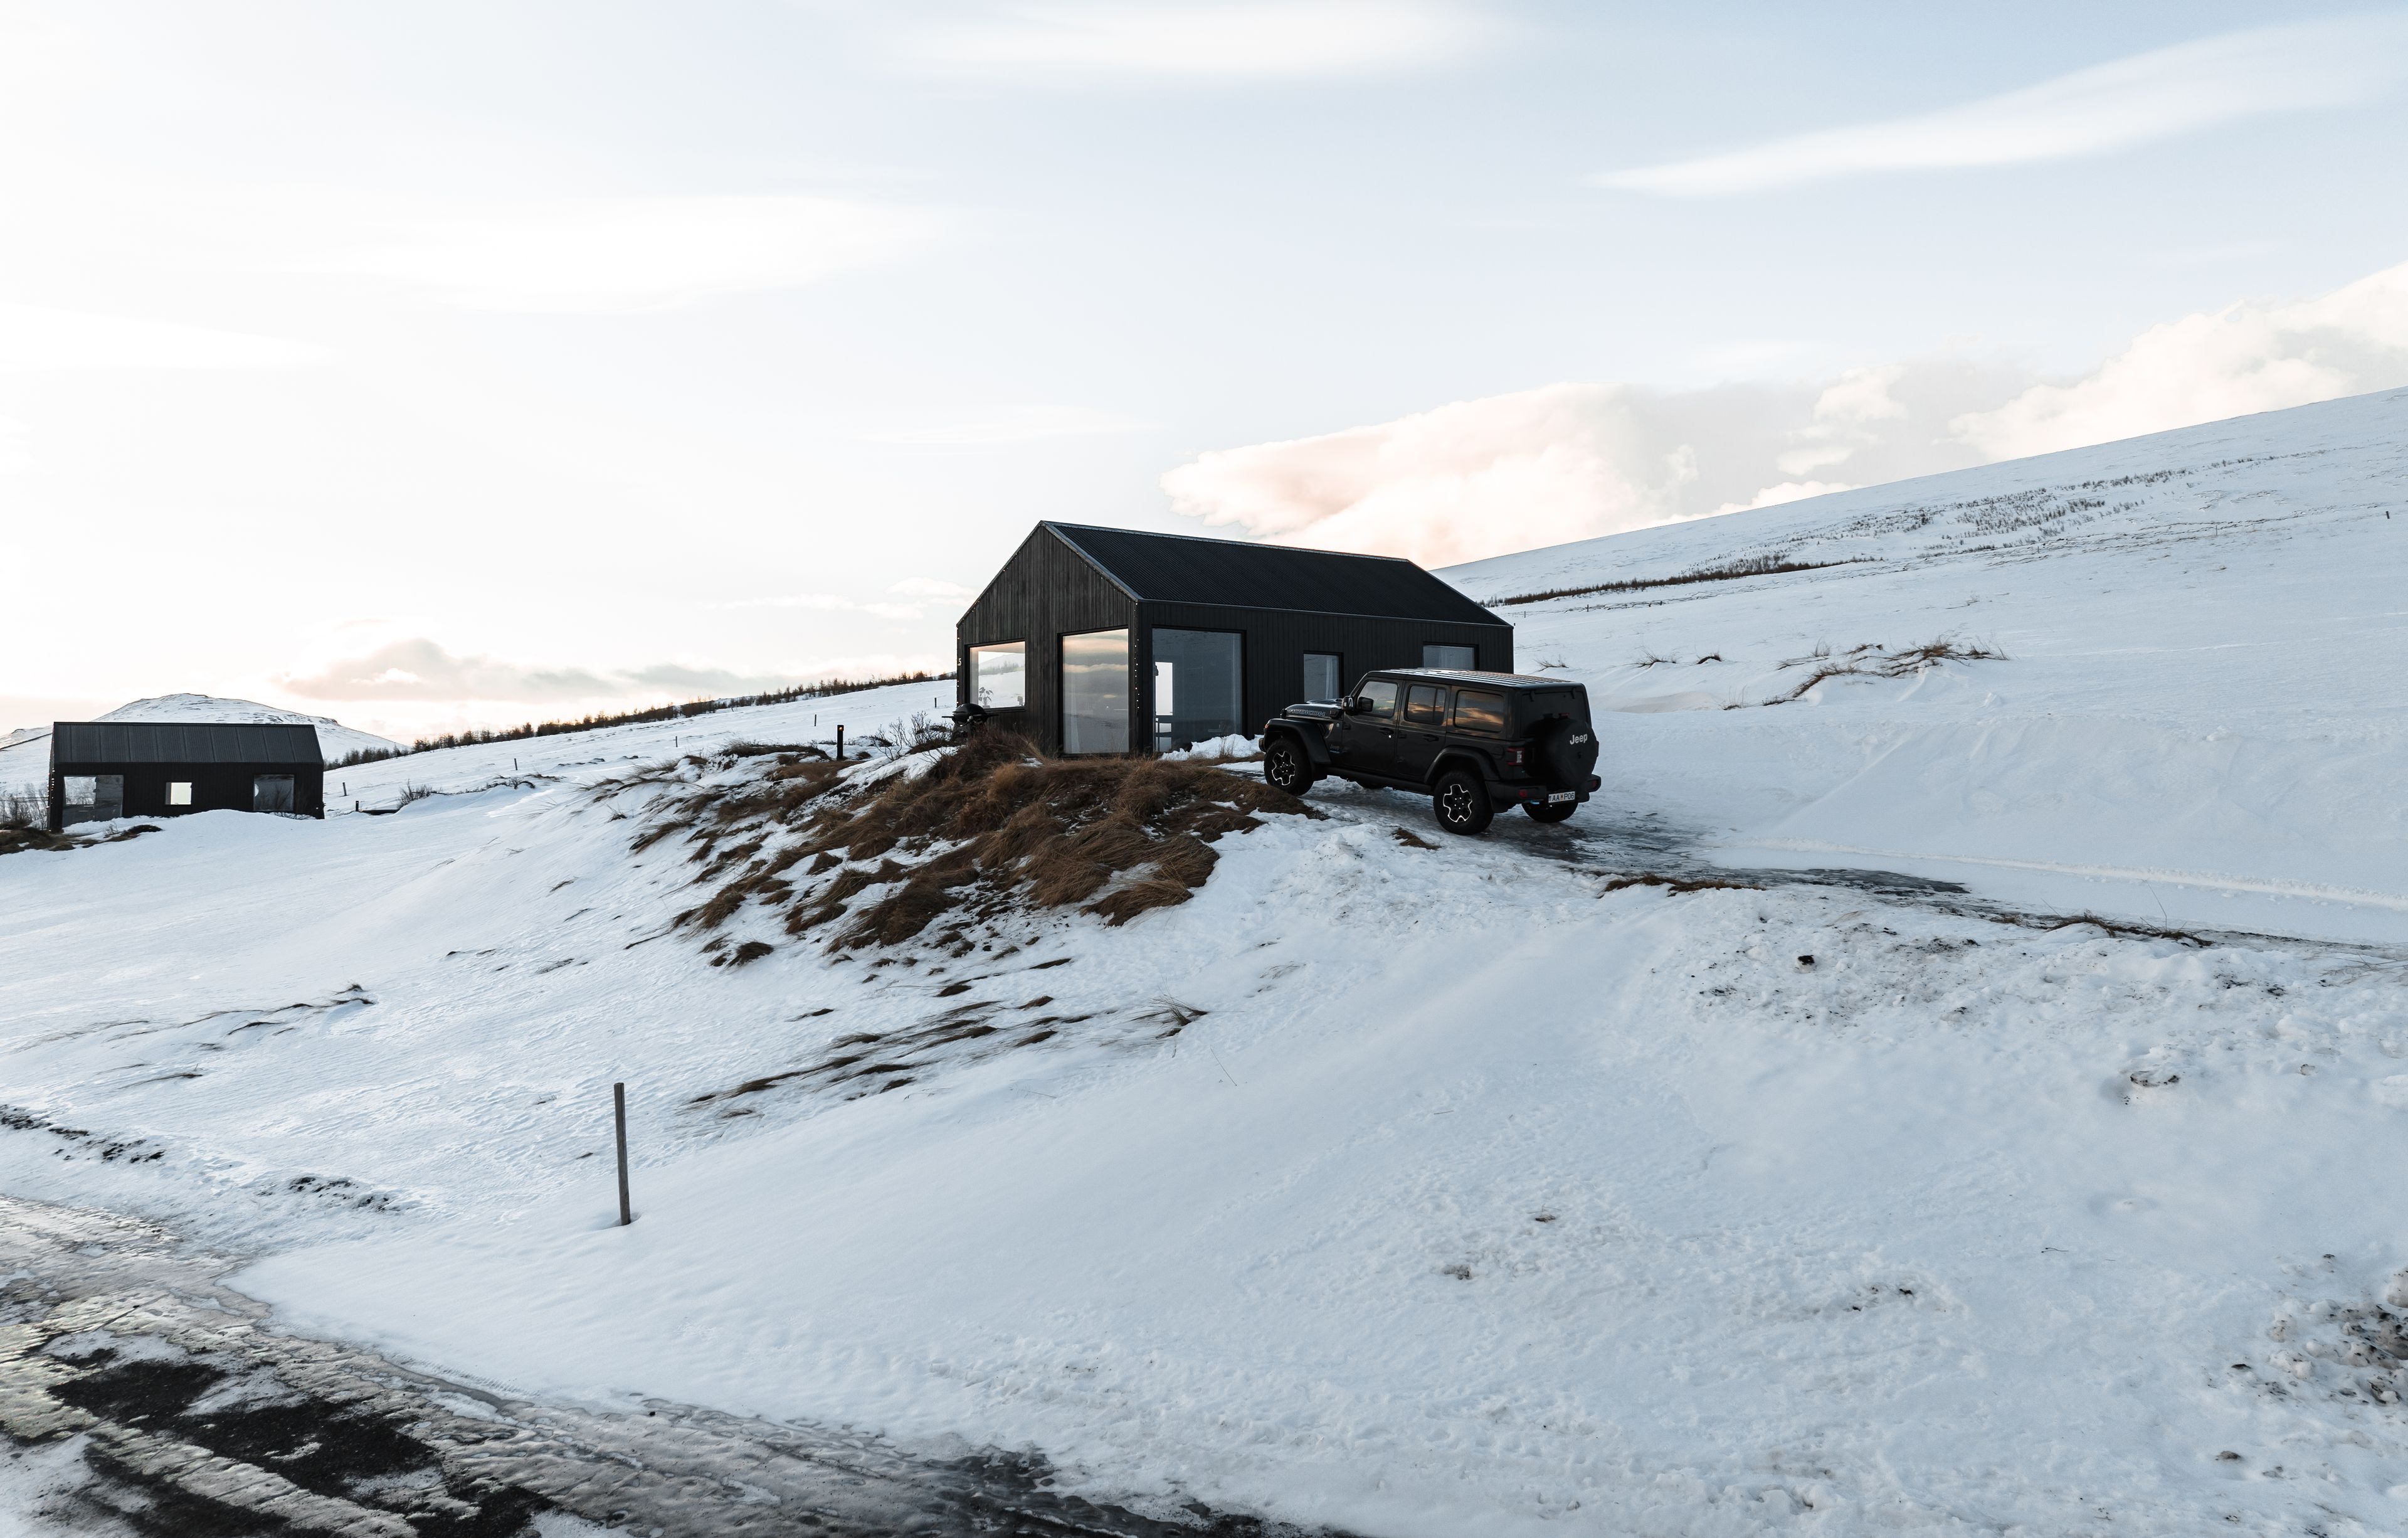 A picture of a rental car near a Accommodation cabin during november in iceland